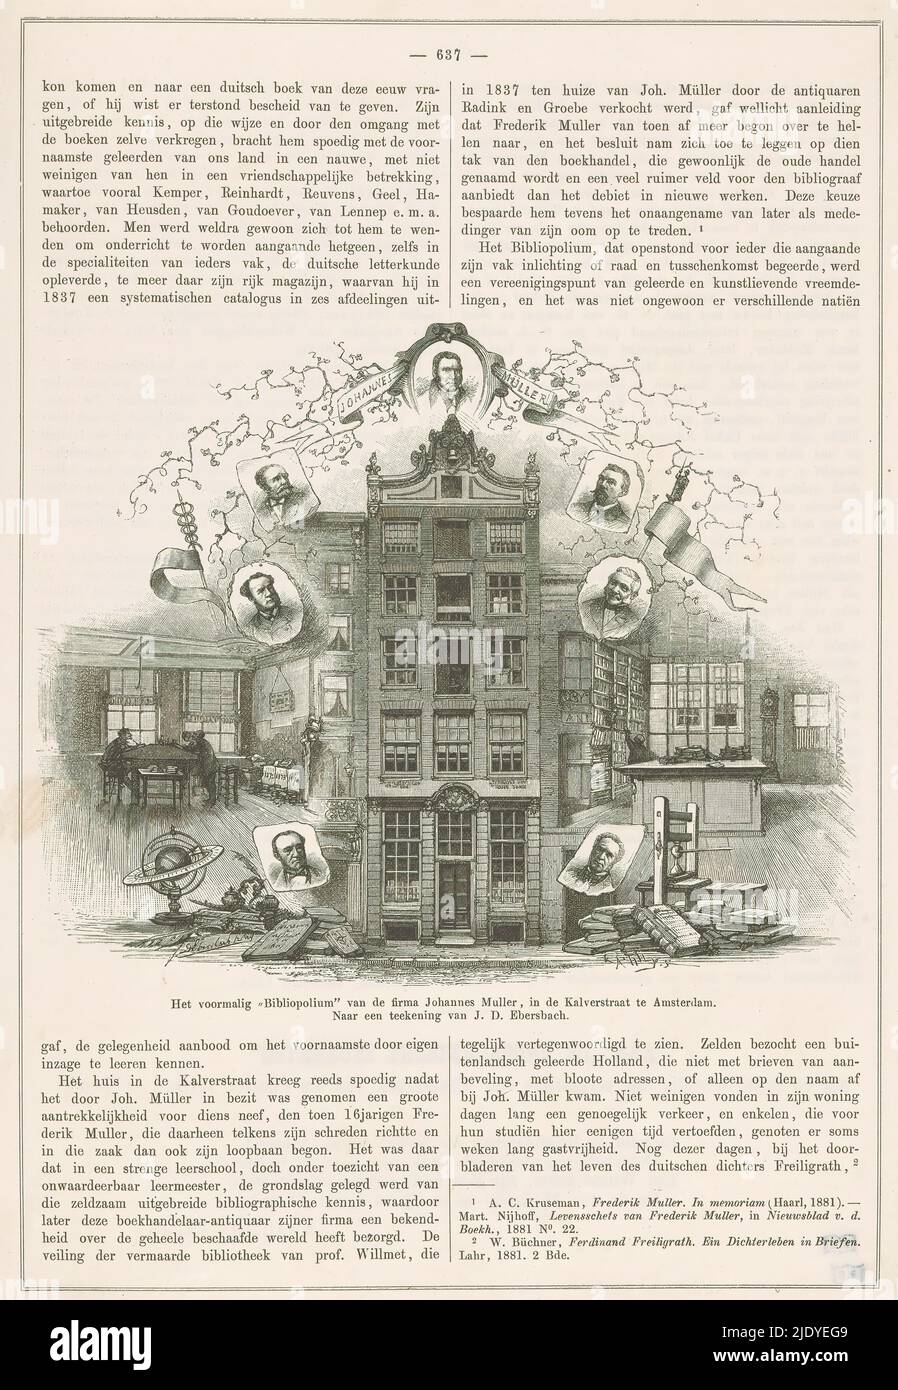 Bibliopolium of Johannes Müller on the Kalverstraat in Amsterdam, Facade of the building on the Kalverstraat. On either side details of the interior and portraits of Johannes and Christiaan Müller and members of the staff., print maker: Auguste Tilly, (mentioned on object), after design by: Johan Daniel Ebersbach, (mentioned on object), 1884, paper, letterpress printing, height 143 mm × width 178 mm, height 350 mm × width 224 mm Stock Photo